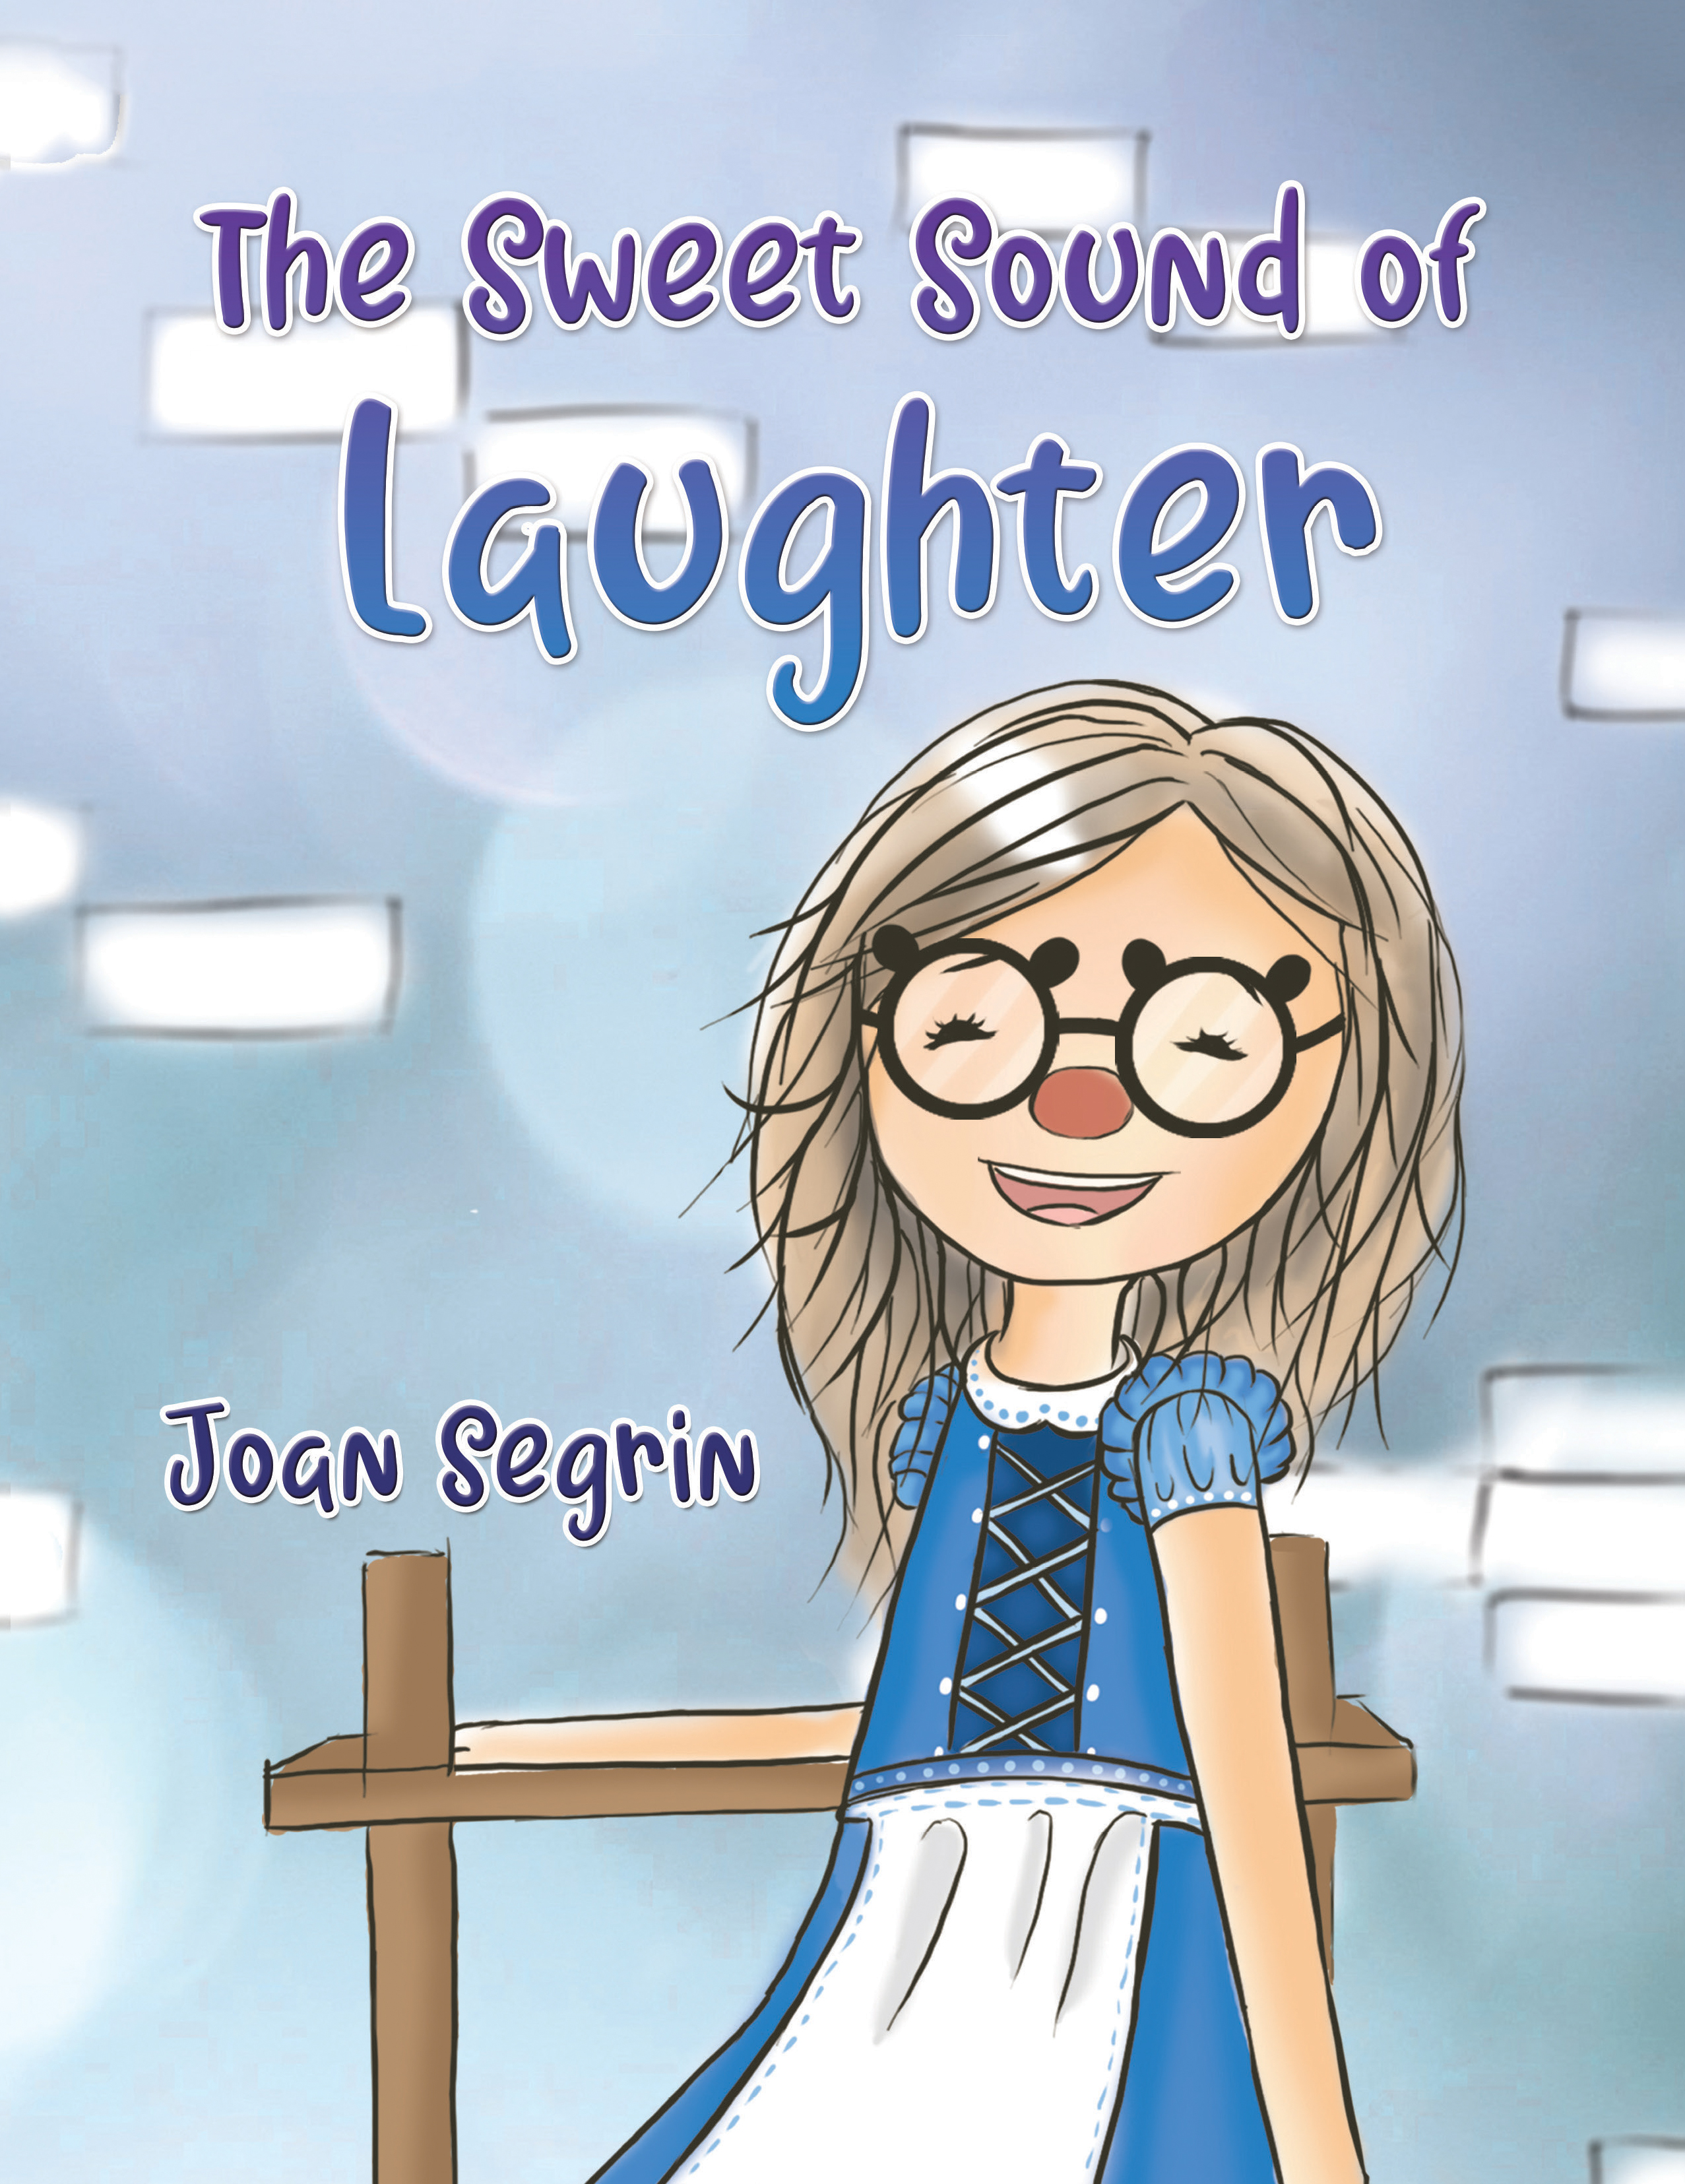 “The Sweet Sound of Laughter” by Joan Segrin